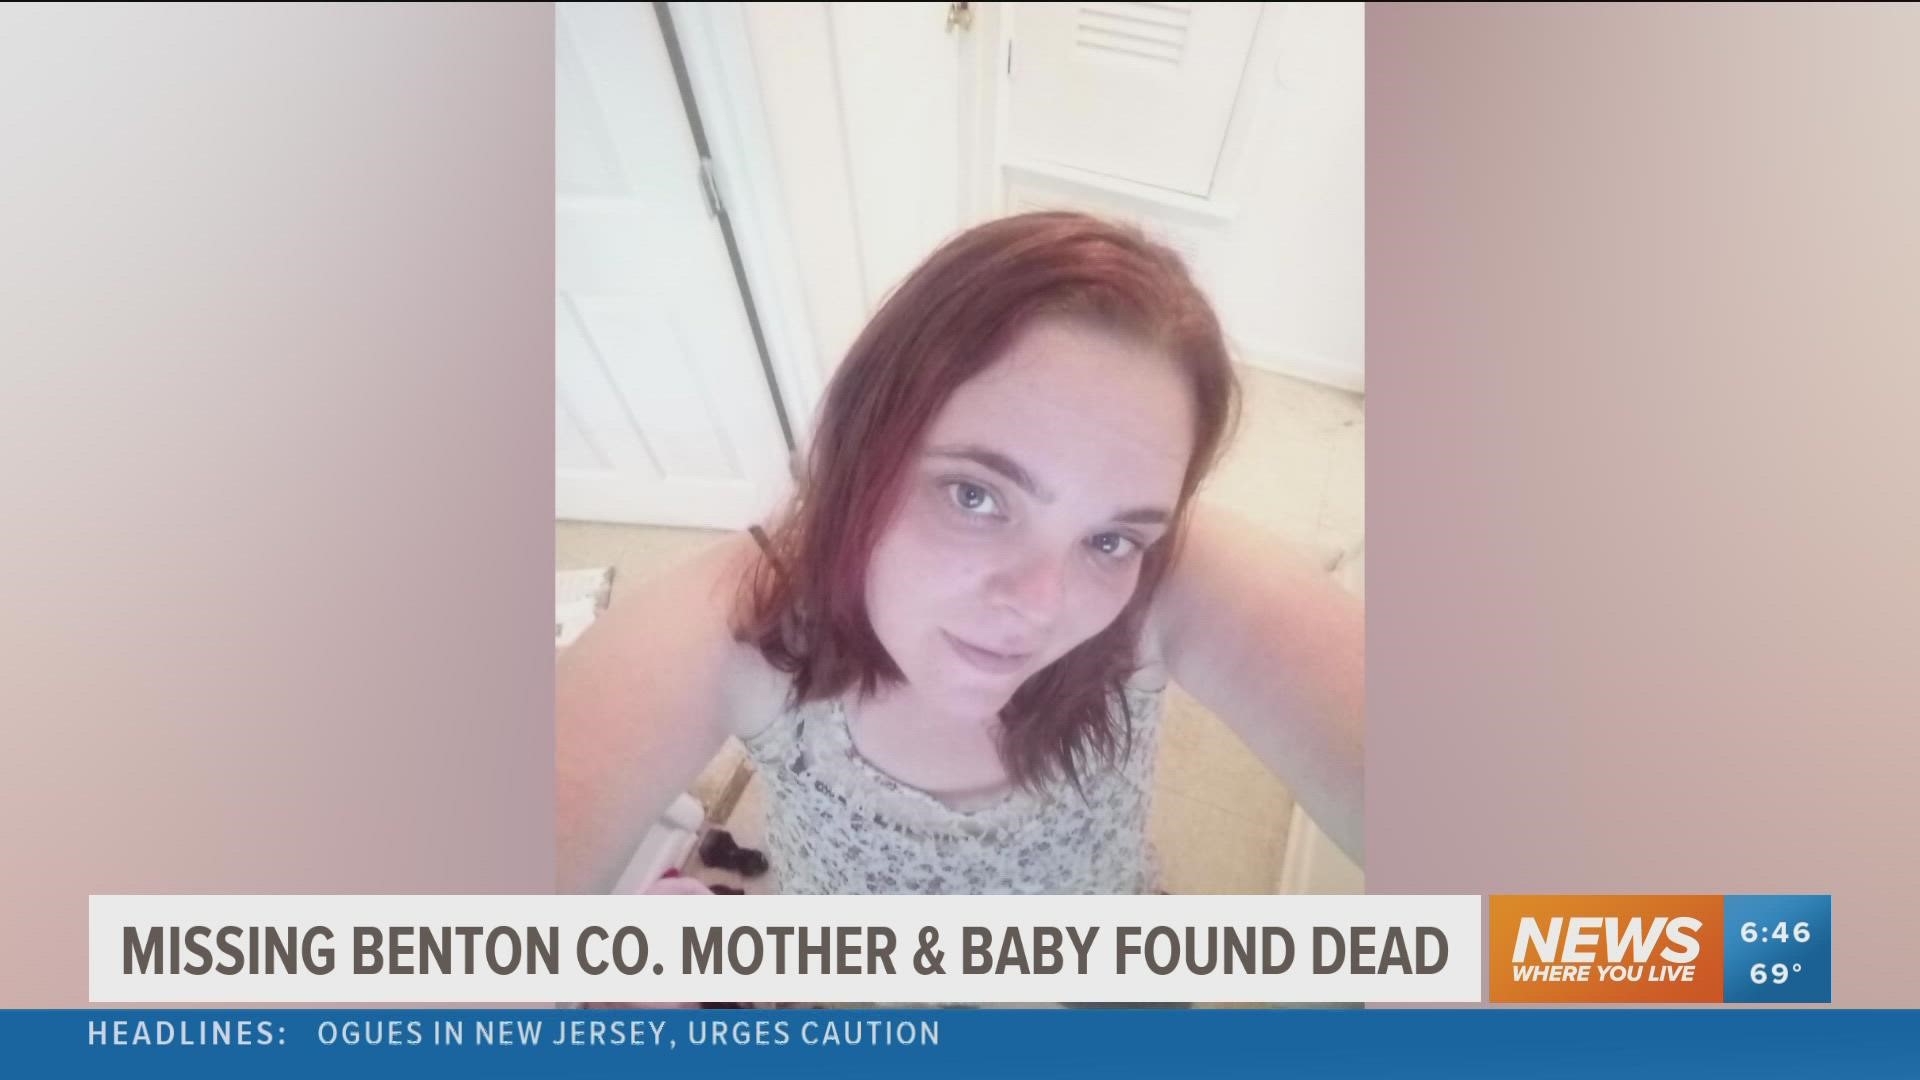 Two people have been arrested on kidnapping charges after a Benton Co. woman and her baby were found dead in Missouri.